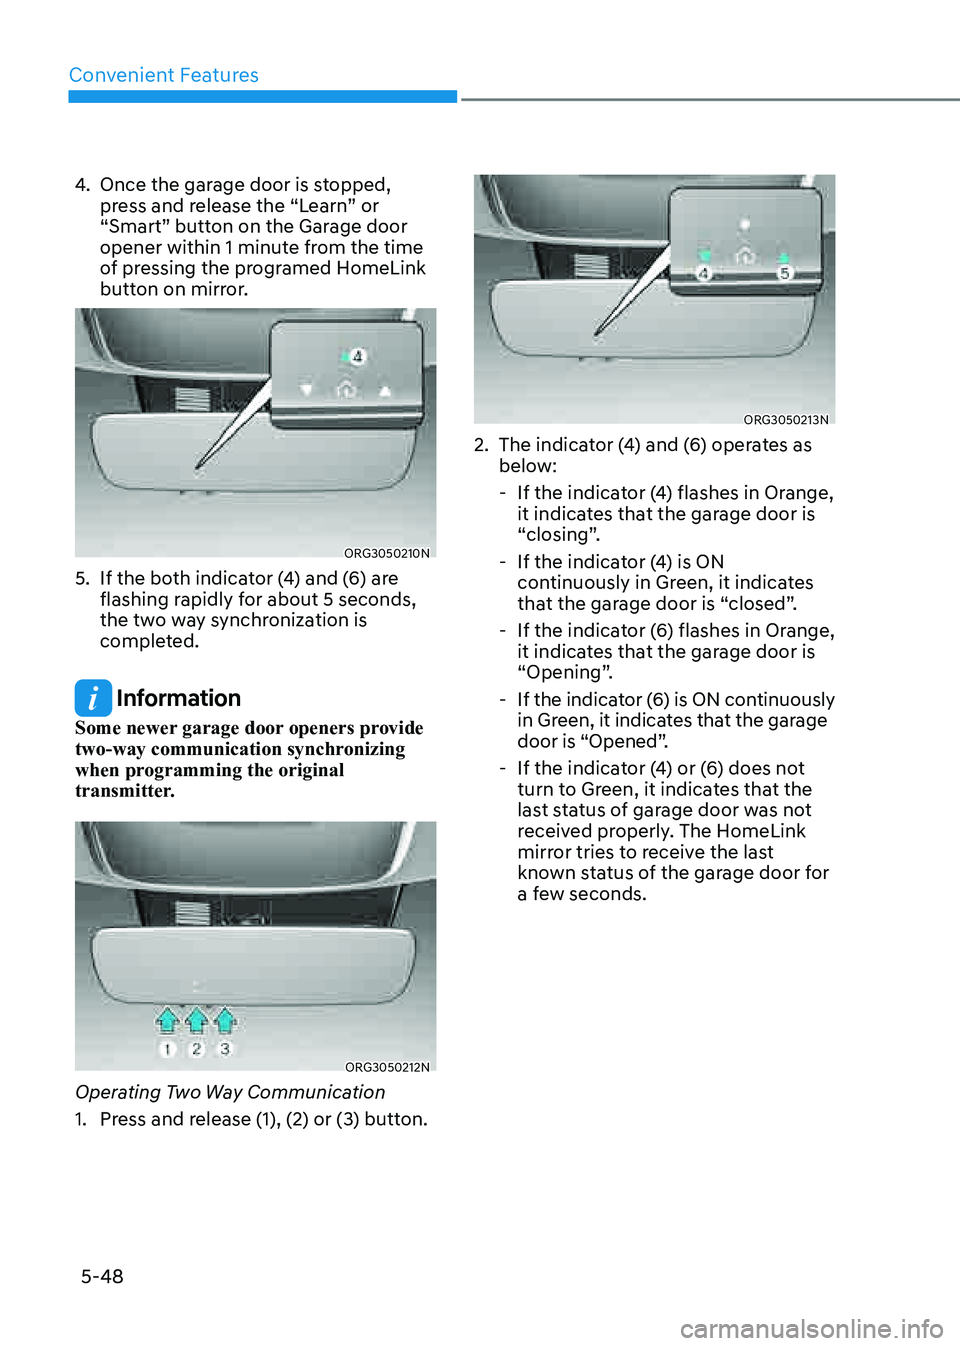 GENESIS GV80 2021  Owners Manual Convenient Features
5-48
4. Once the garage door is stopped, 
press and release the “Learn” or 
“Smart” button on the Garage door 
opener within 1 minute from the time 
of pressing the program